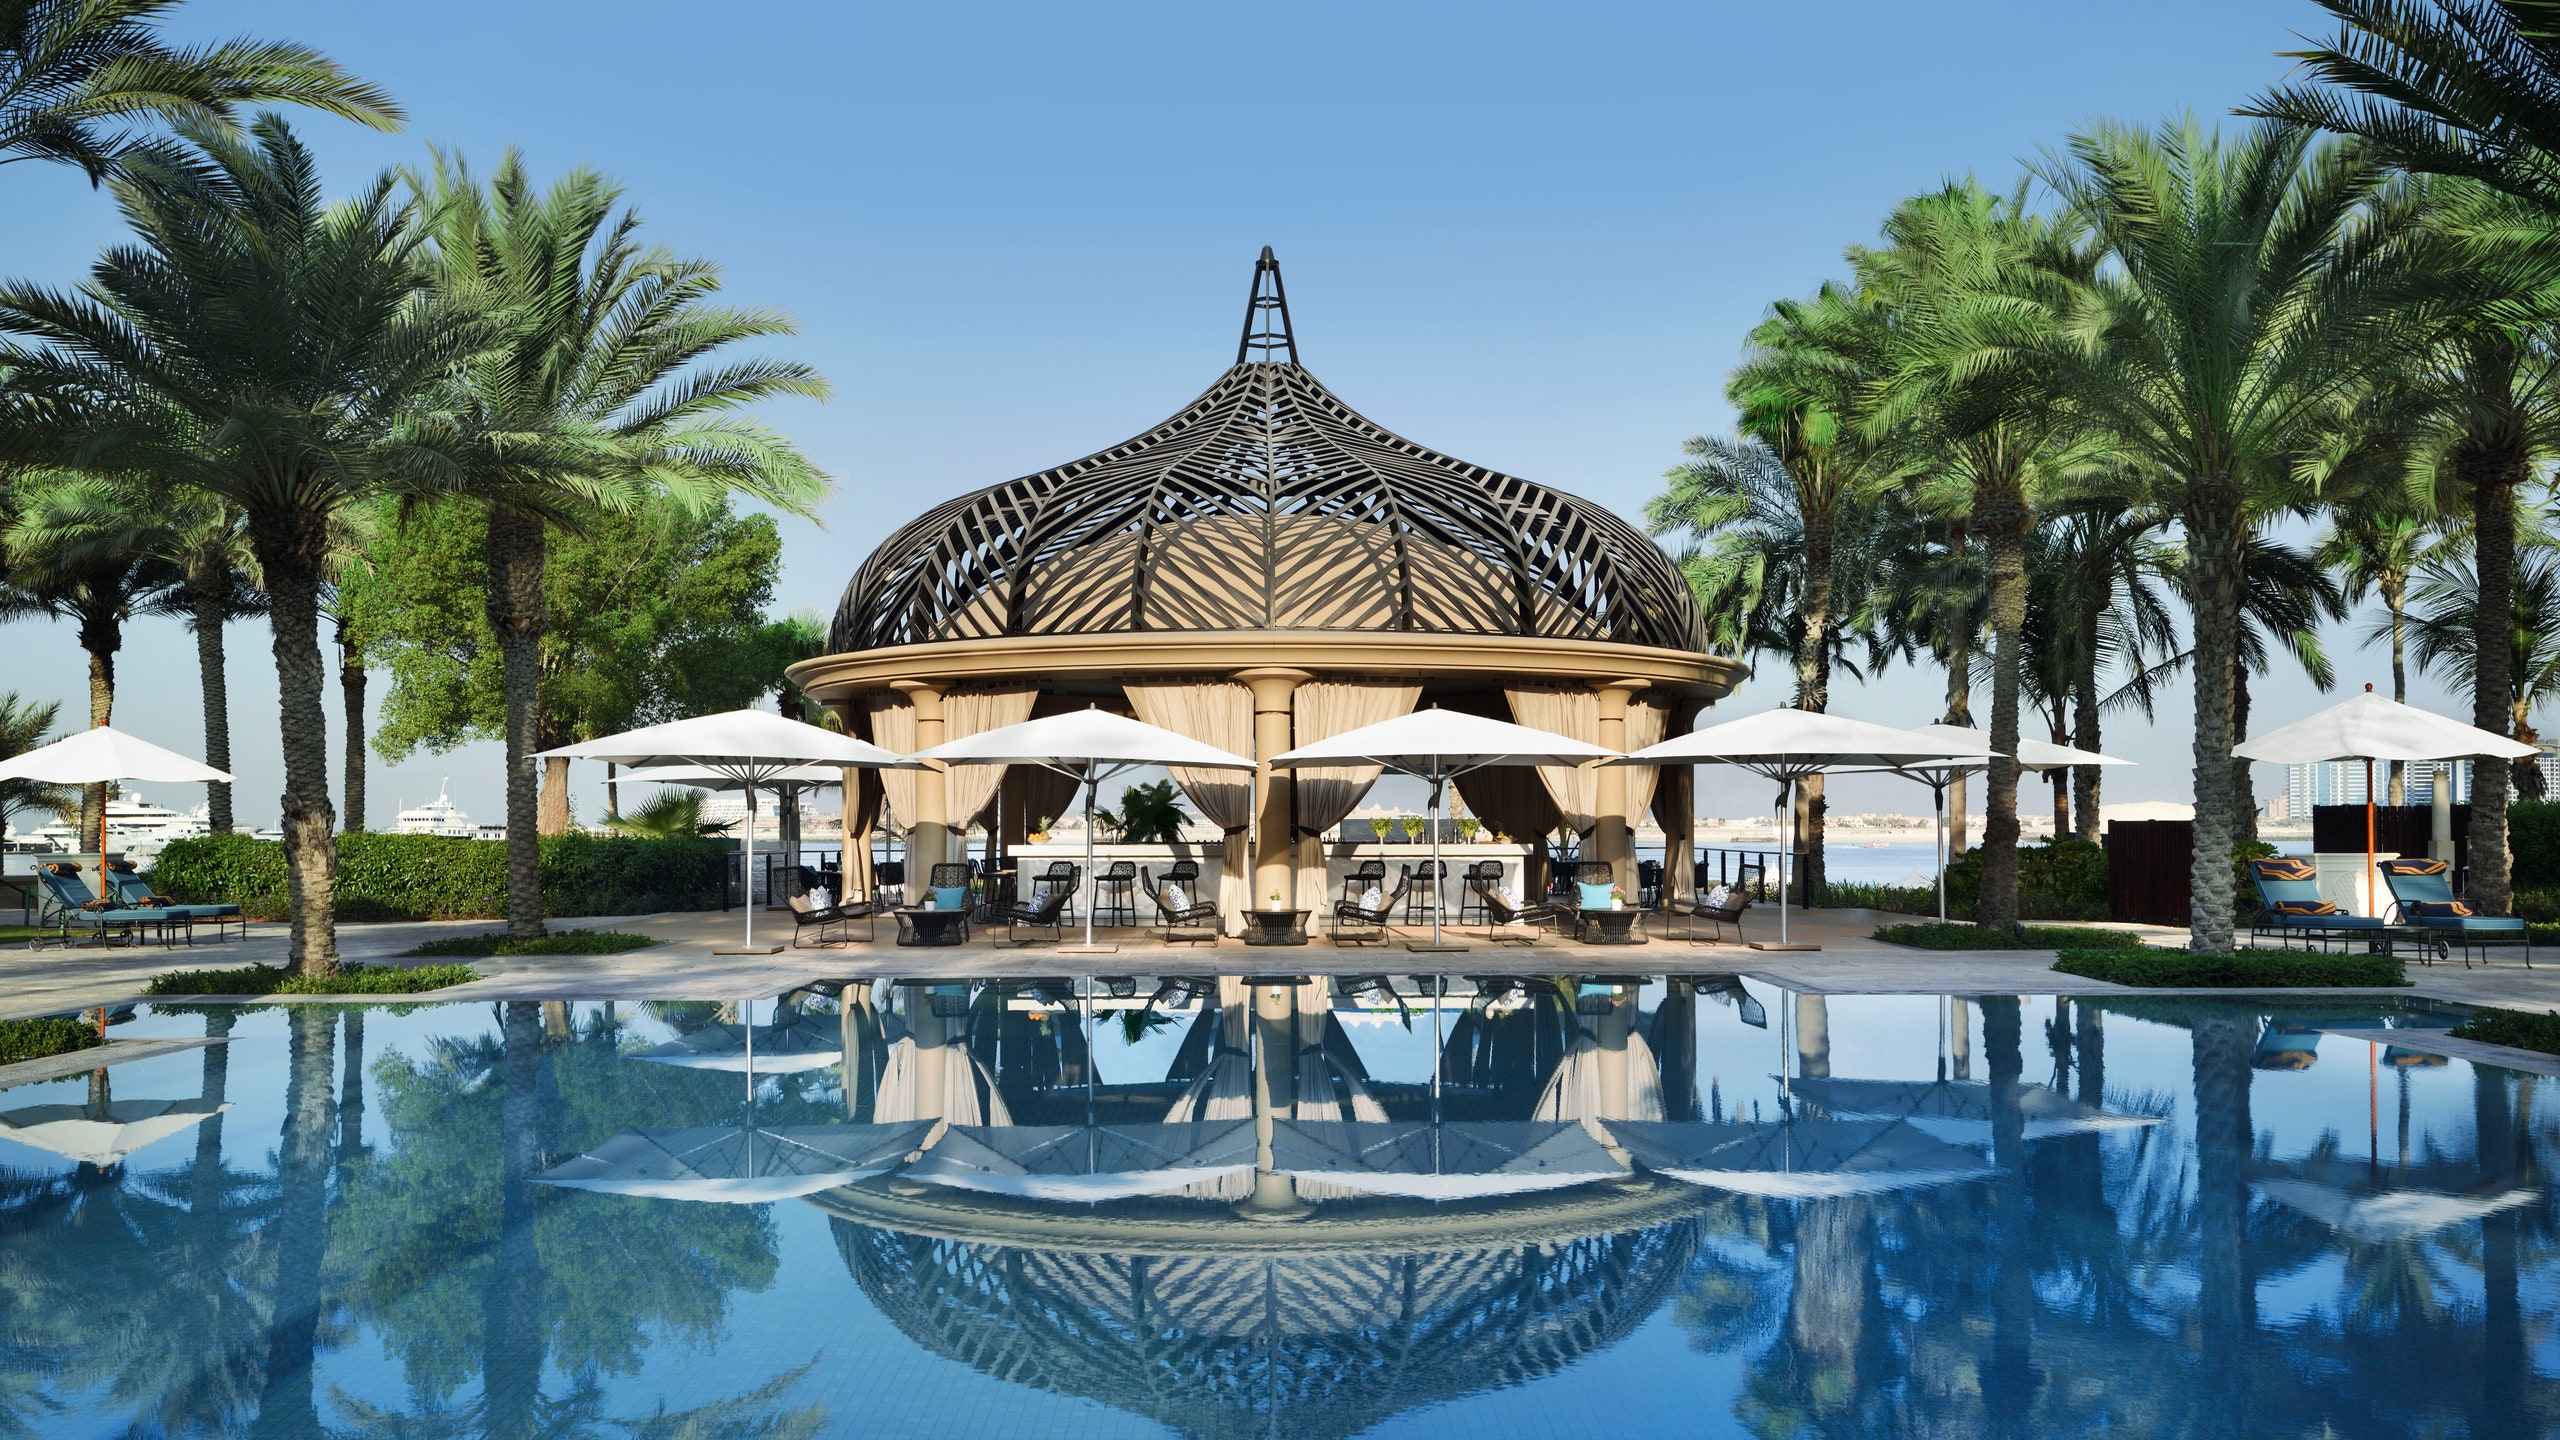 The Royal Mirage: A Luxurious Retreat Fit for Royalty